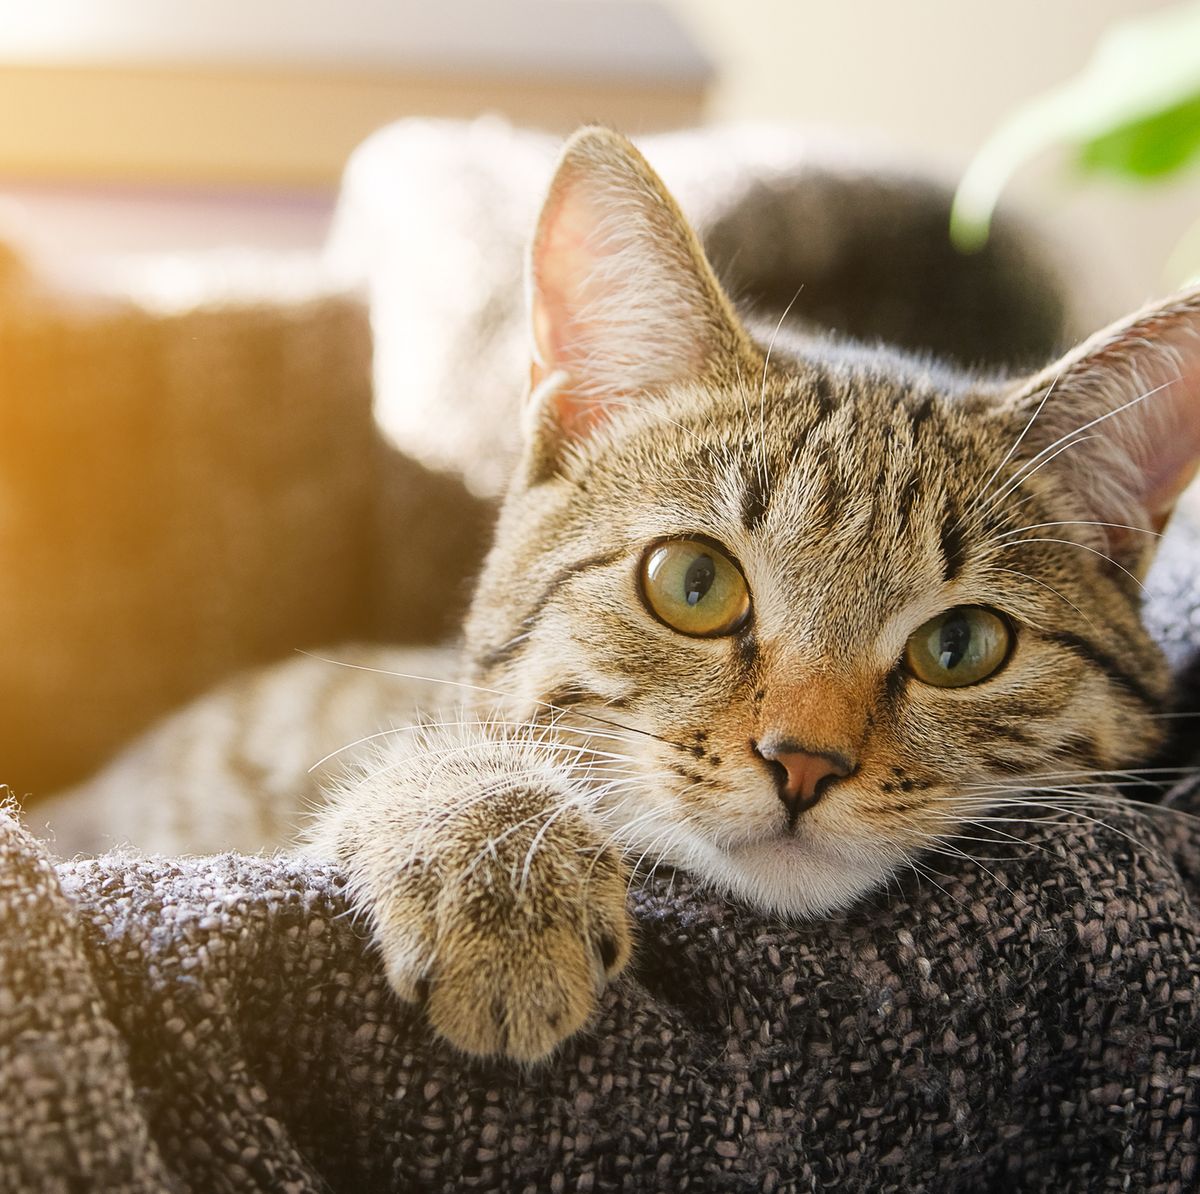 Cats Care About People More Than Food, New Study Finds